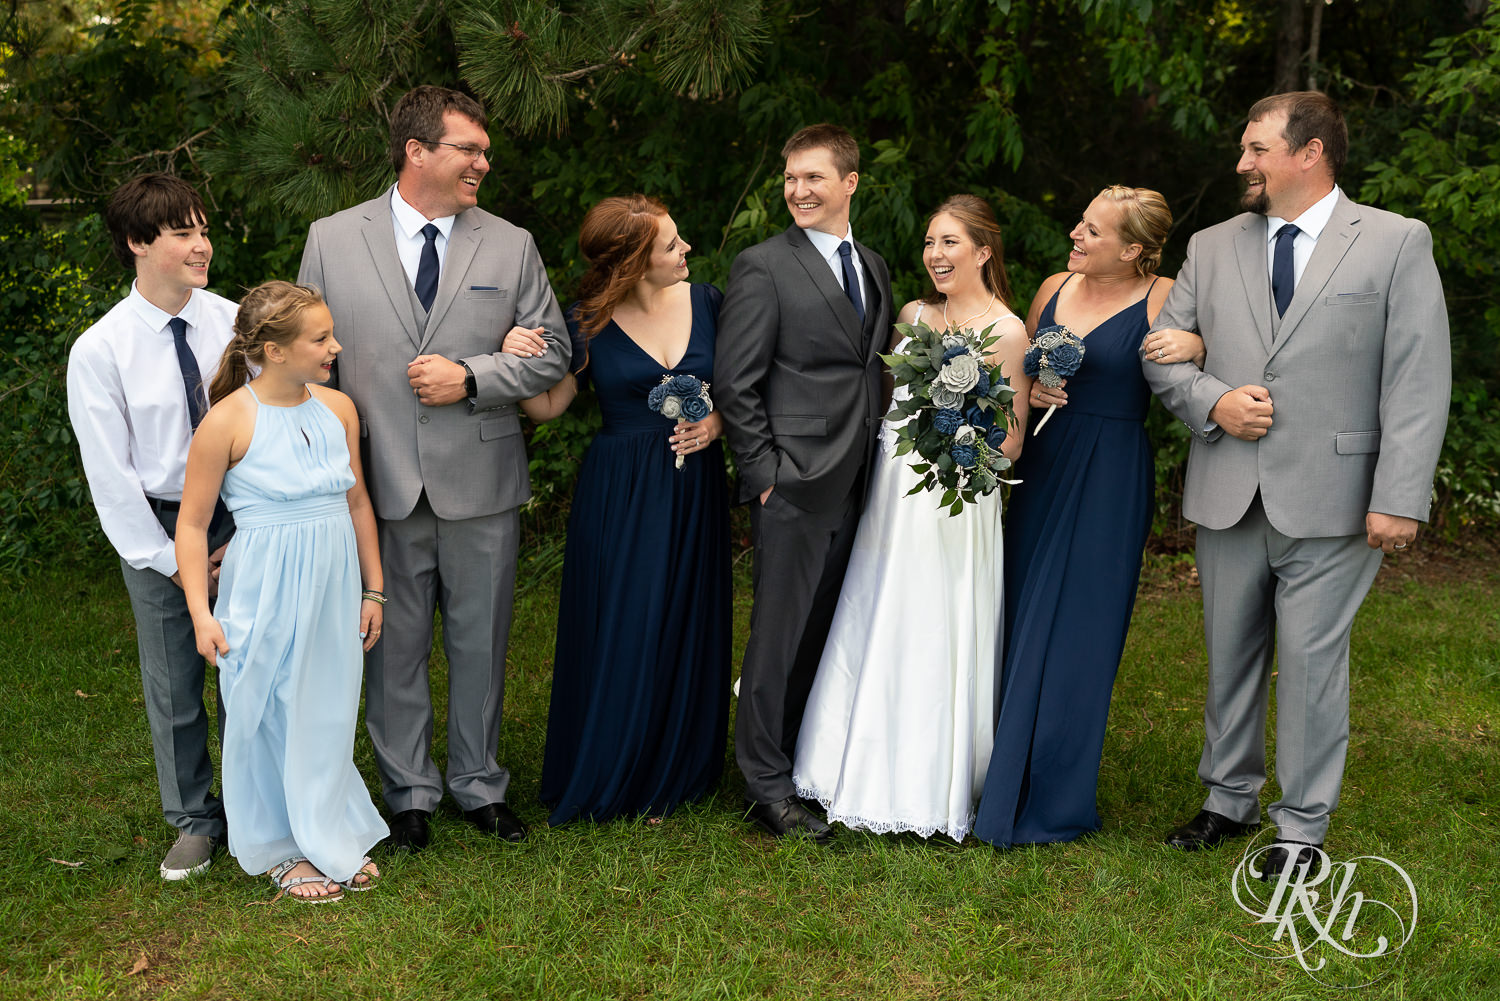 Wedding party at a summer wedding at Stone Lion Winery and Events in Isanti, Minnesota. 